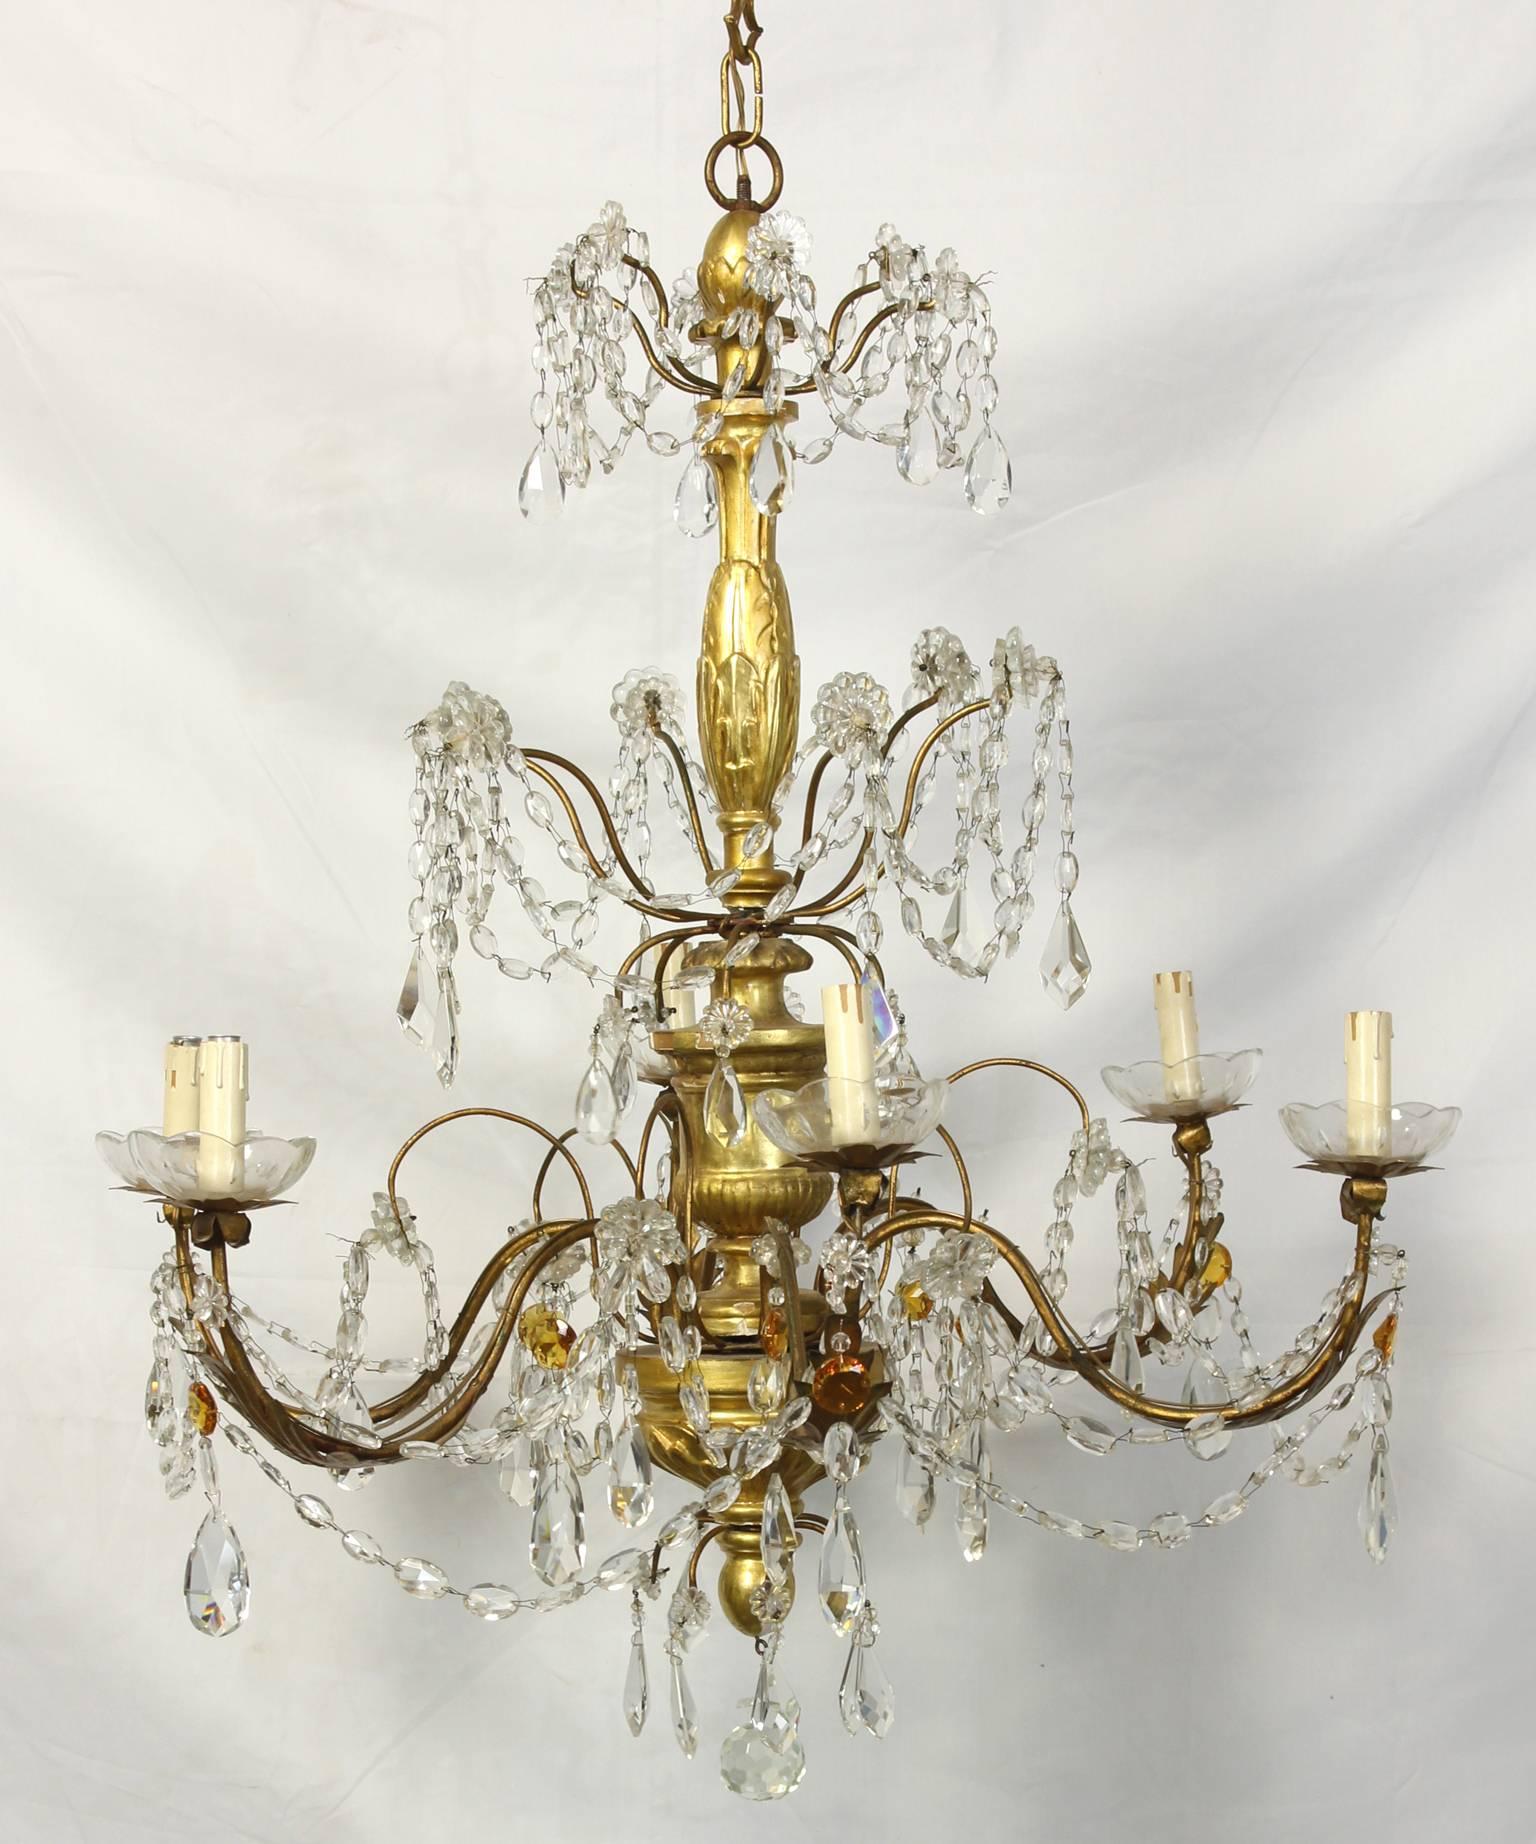 An Italian giltwood and crystal six-light chandelier dating from the early 19th century. The chandelier features a central giltwood staff adorned with gilt iron arms draped with swags of clear and amber crystals.